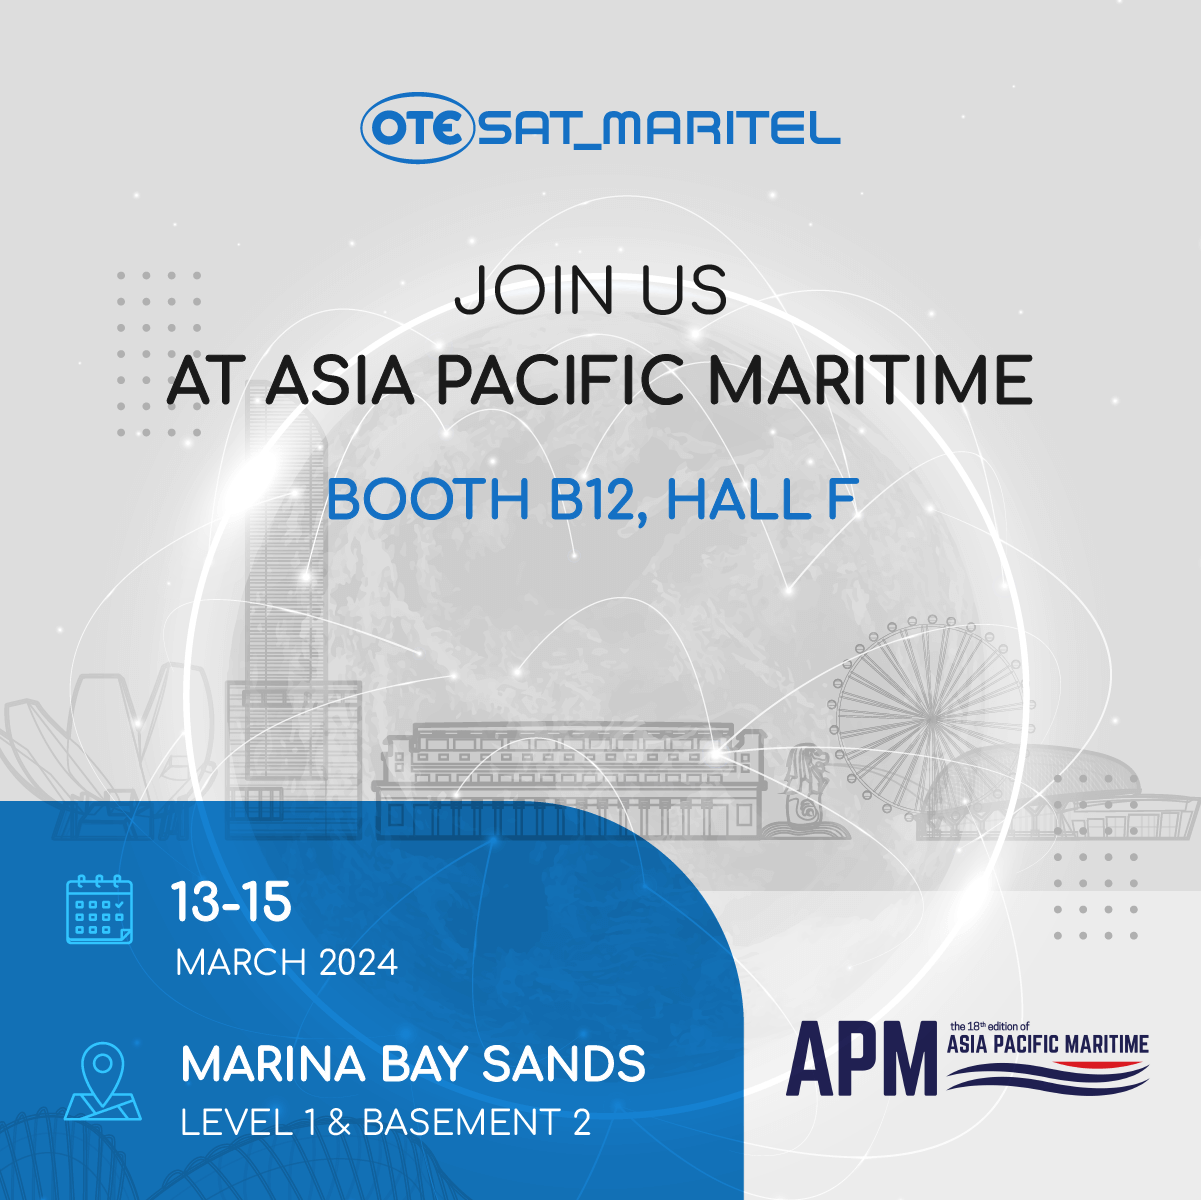 Participation at Asia Pacific Maritime 2024